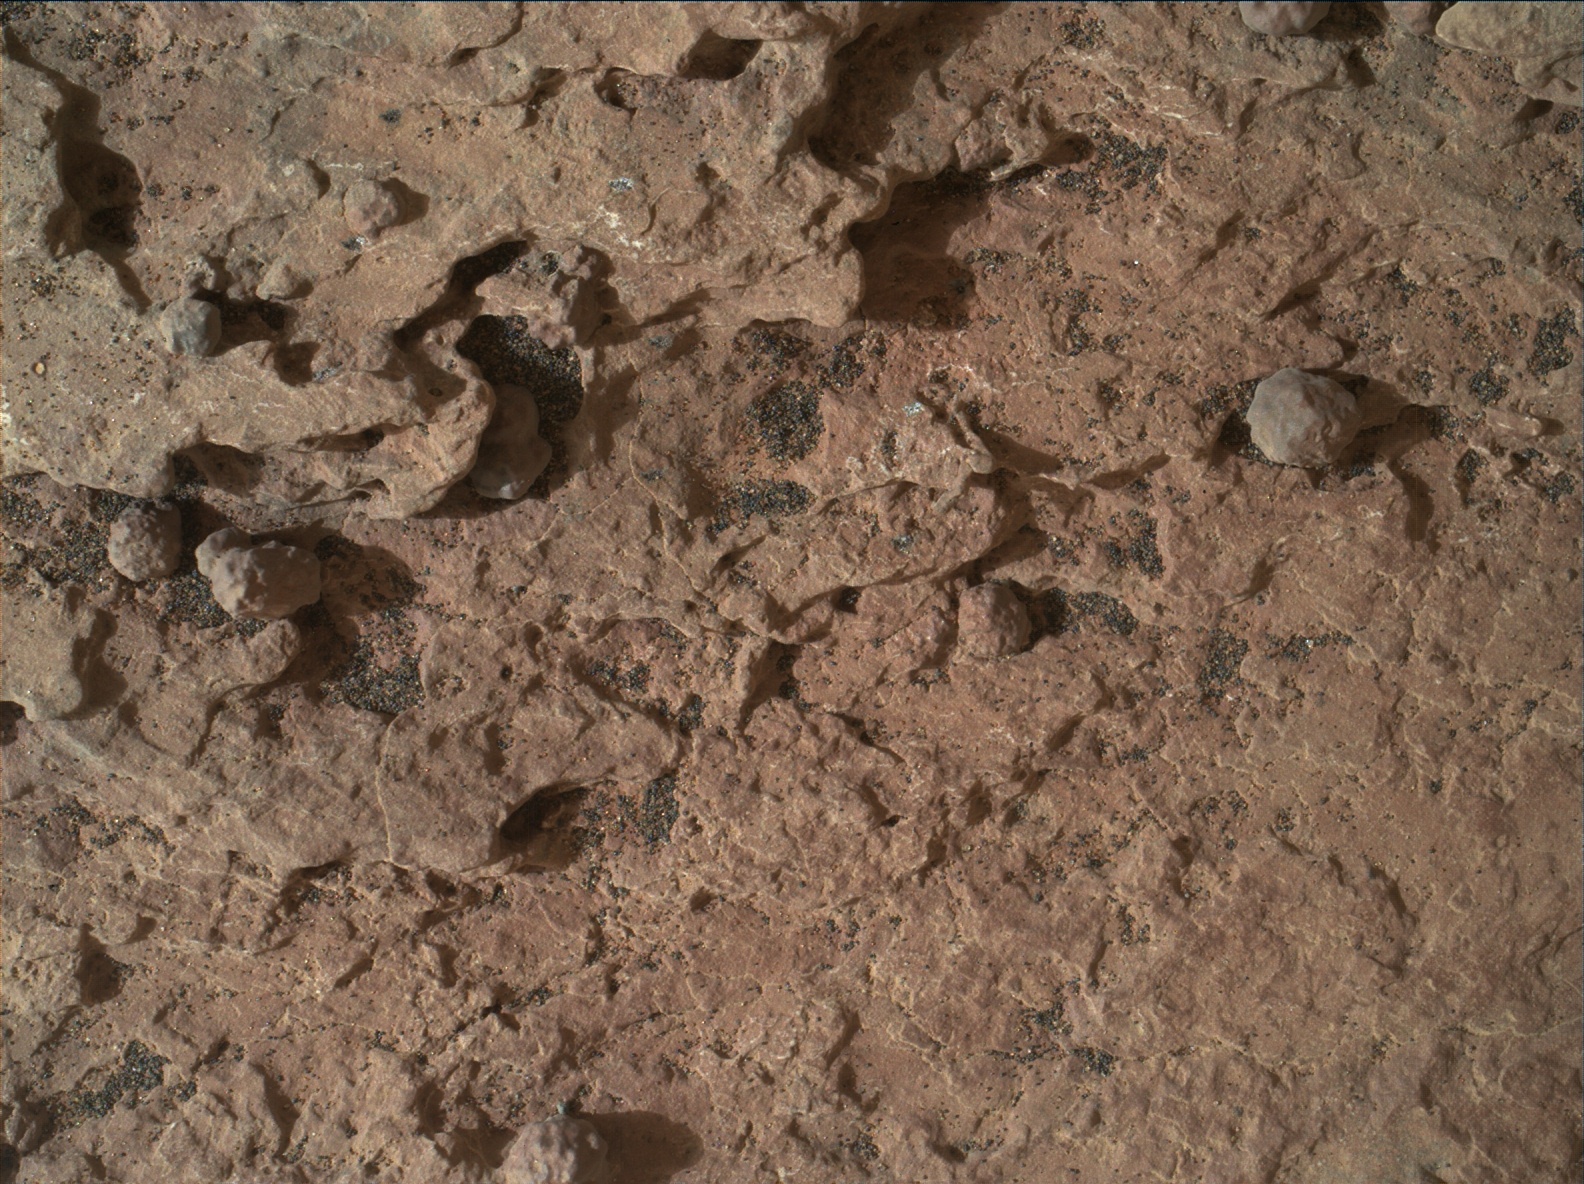 Nasa's Mars rover Curiosity acquired this image using its Mars Hand Lens Imager (MAHLI) on Sol 1615